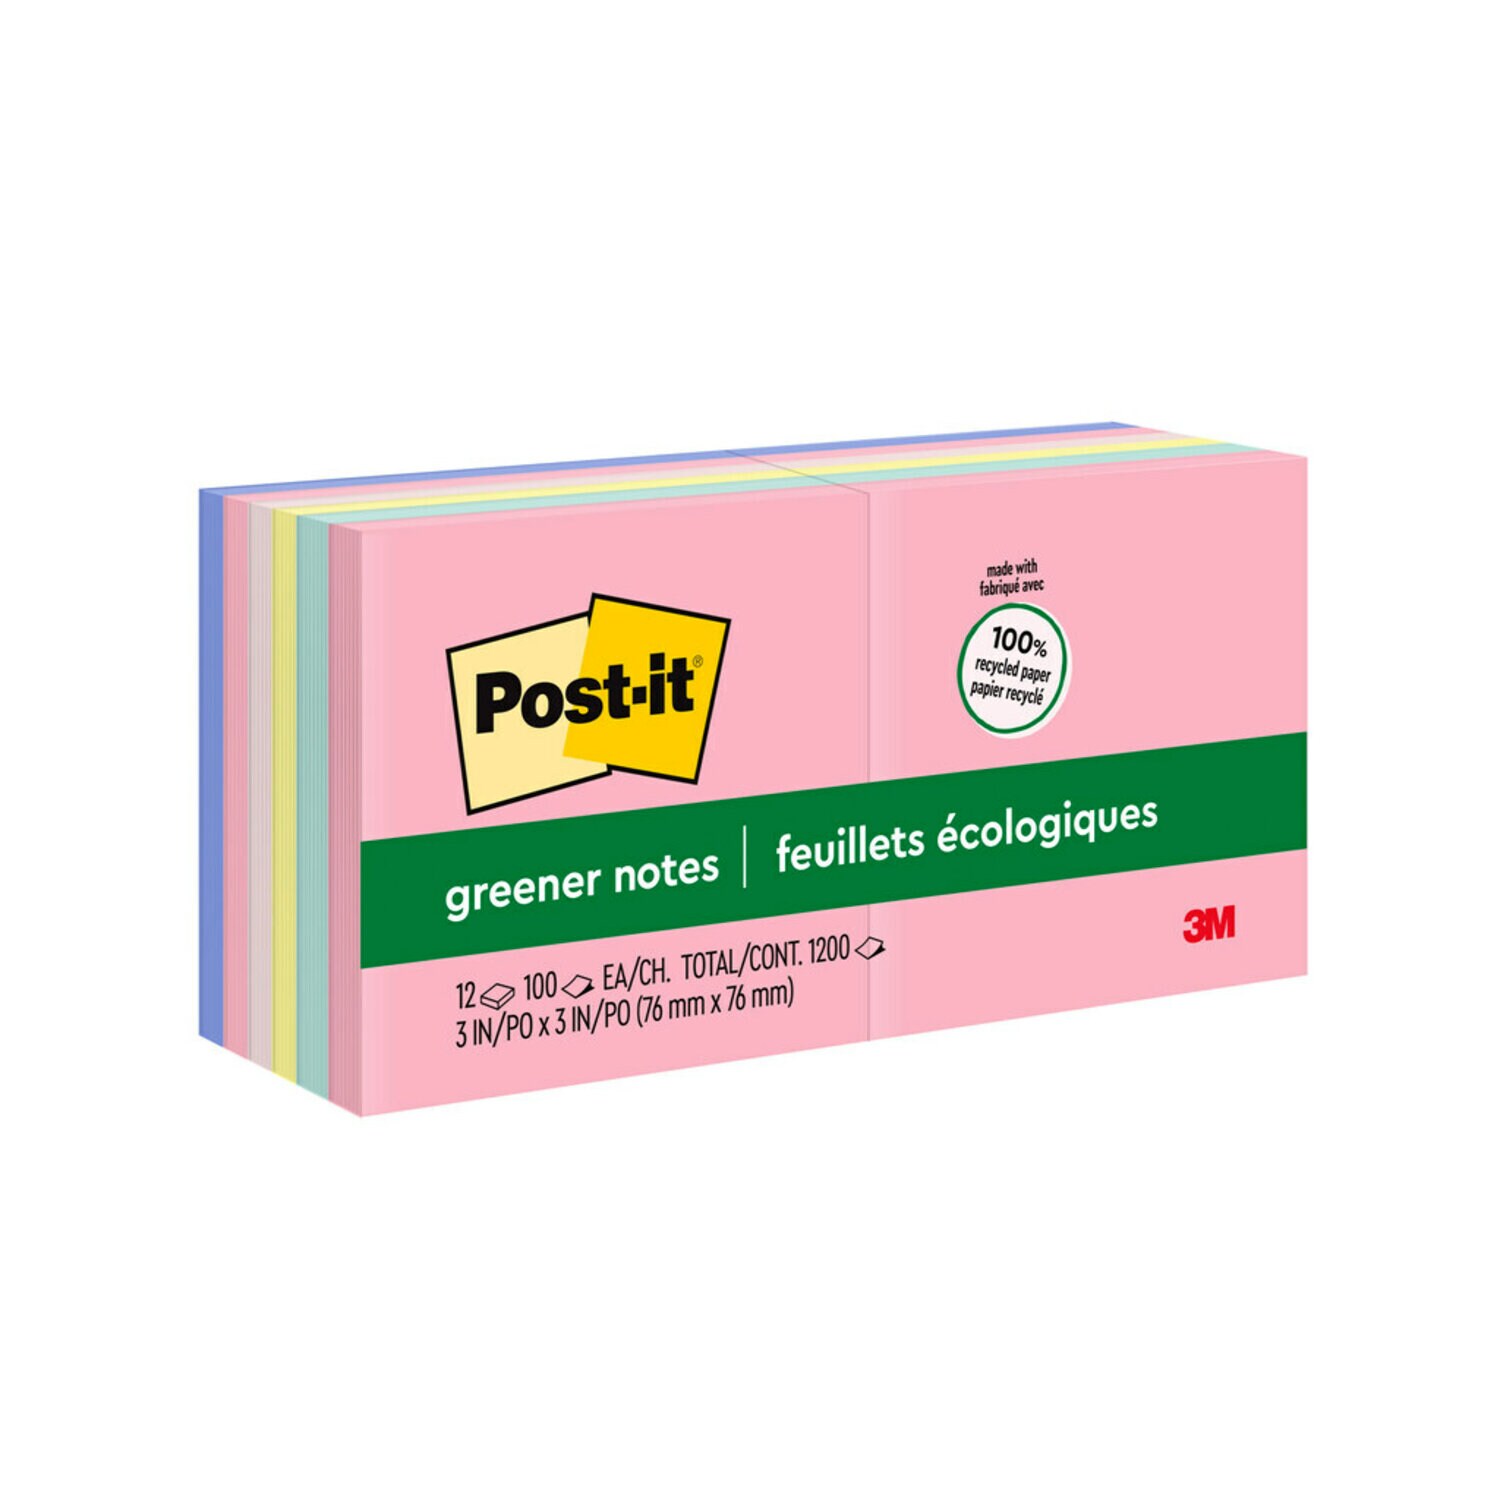 7100230238 - Post-it Greener Notes 654-RP-A, 3 in x 3 in (76 mm x 76 mm), Helsinki colors